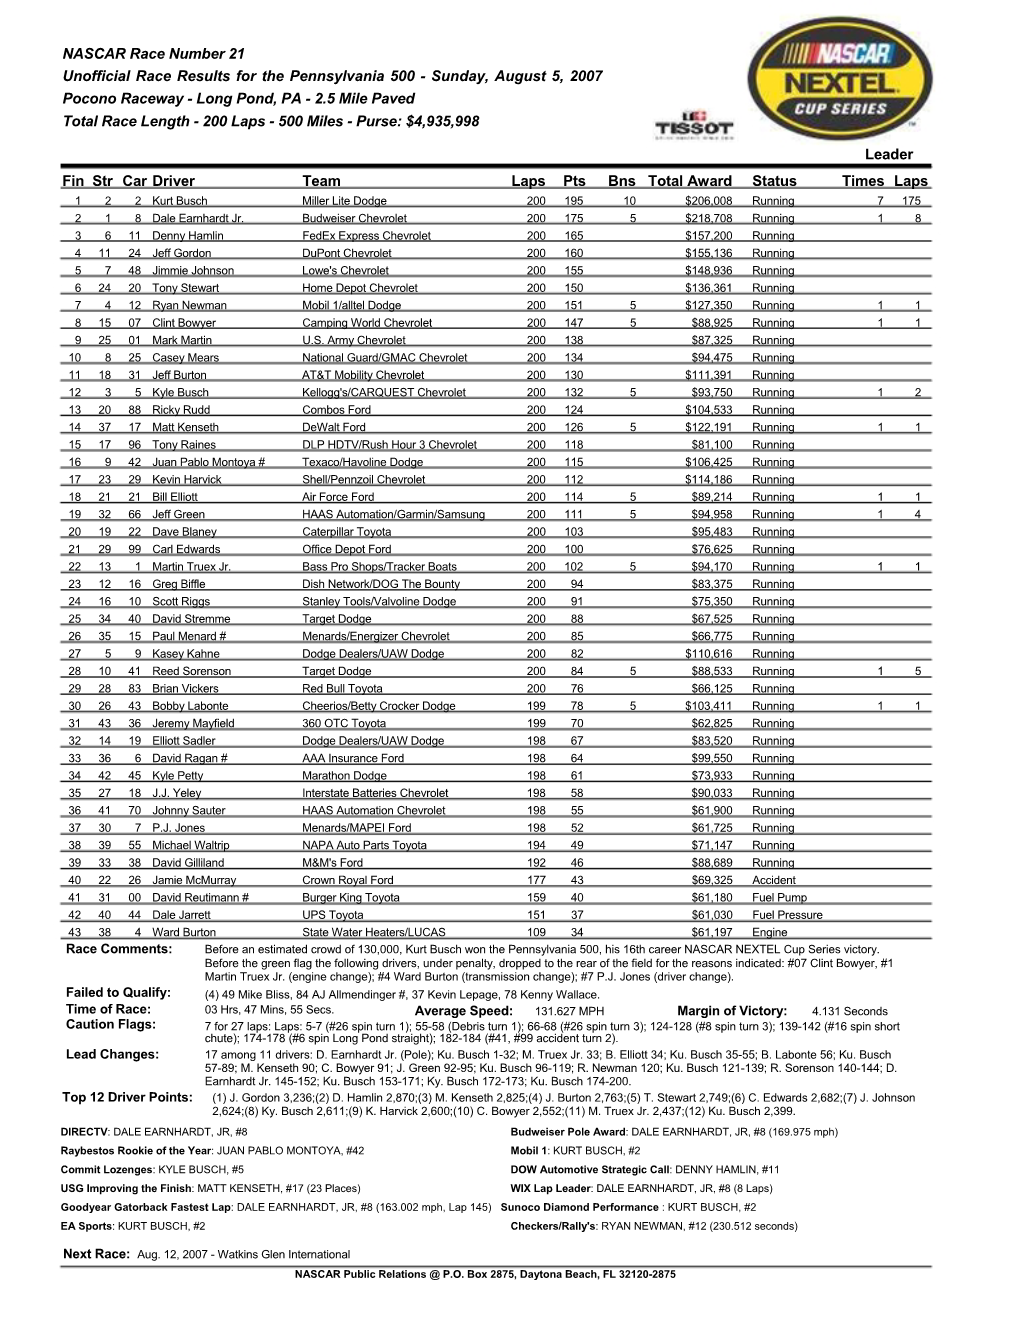 NASCAR Race Number 21 Unofficial Race Results for the Pennsylvania